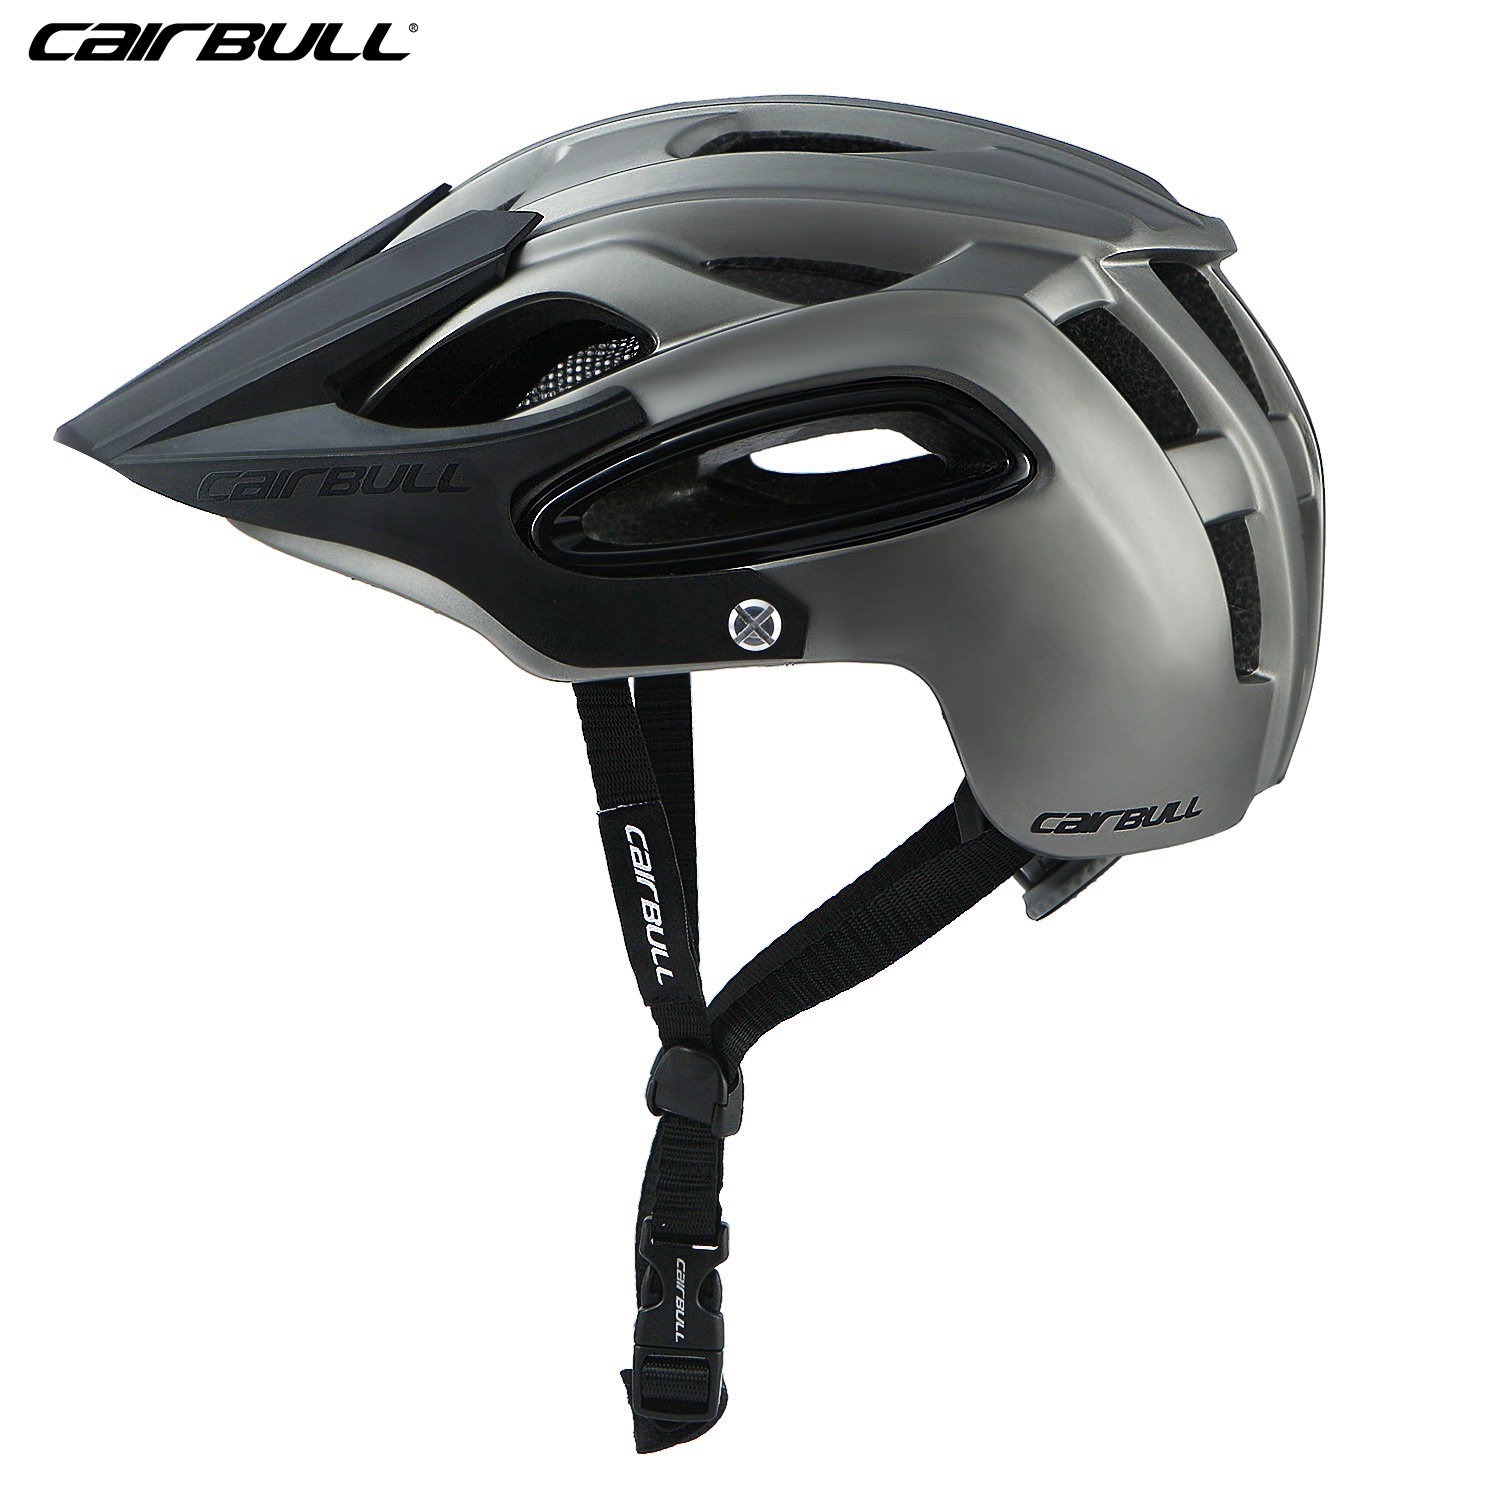 Cairbull Adult MTB Bike Helmet with Visor - Safety Protection